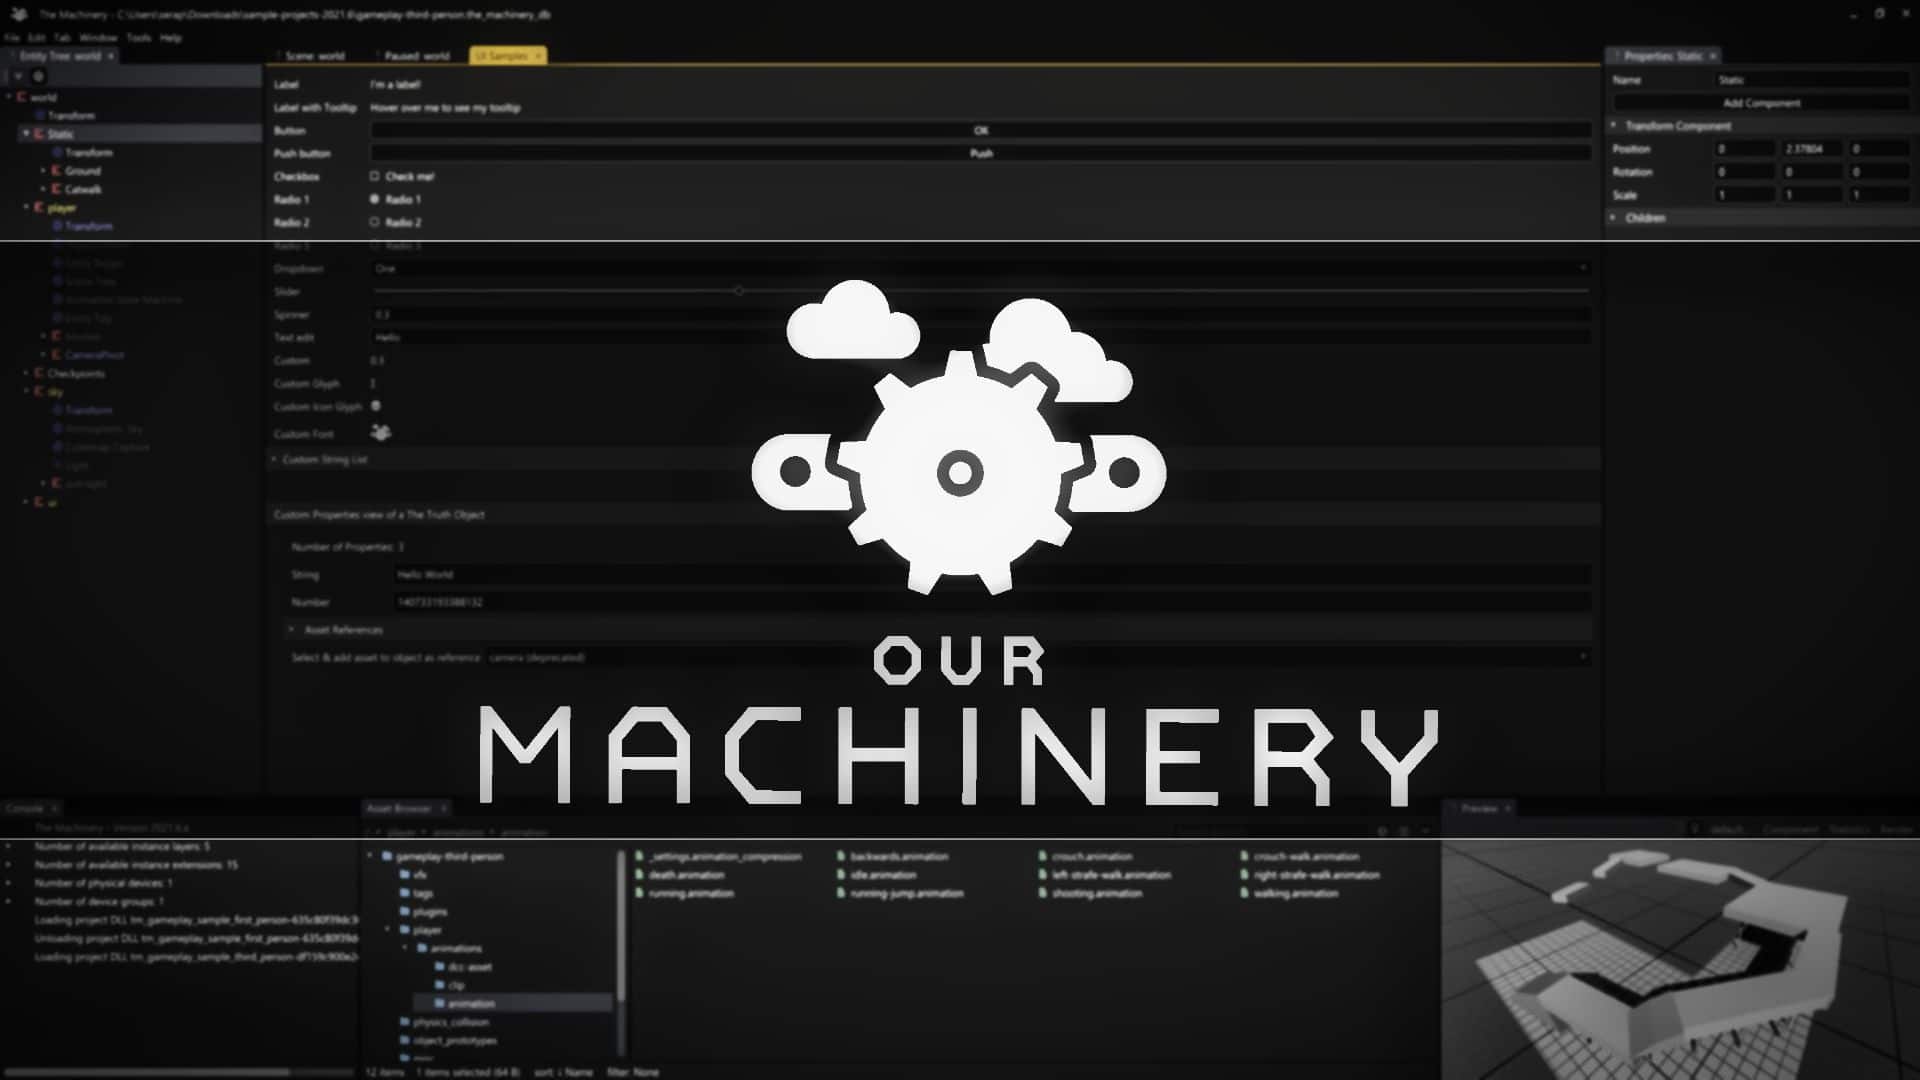 The machine is designed to. Игровые движки. The Machinery game engine. Infernal engine игровые движки. What is game engine.